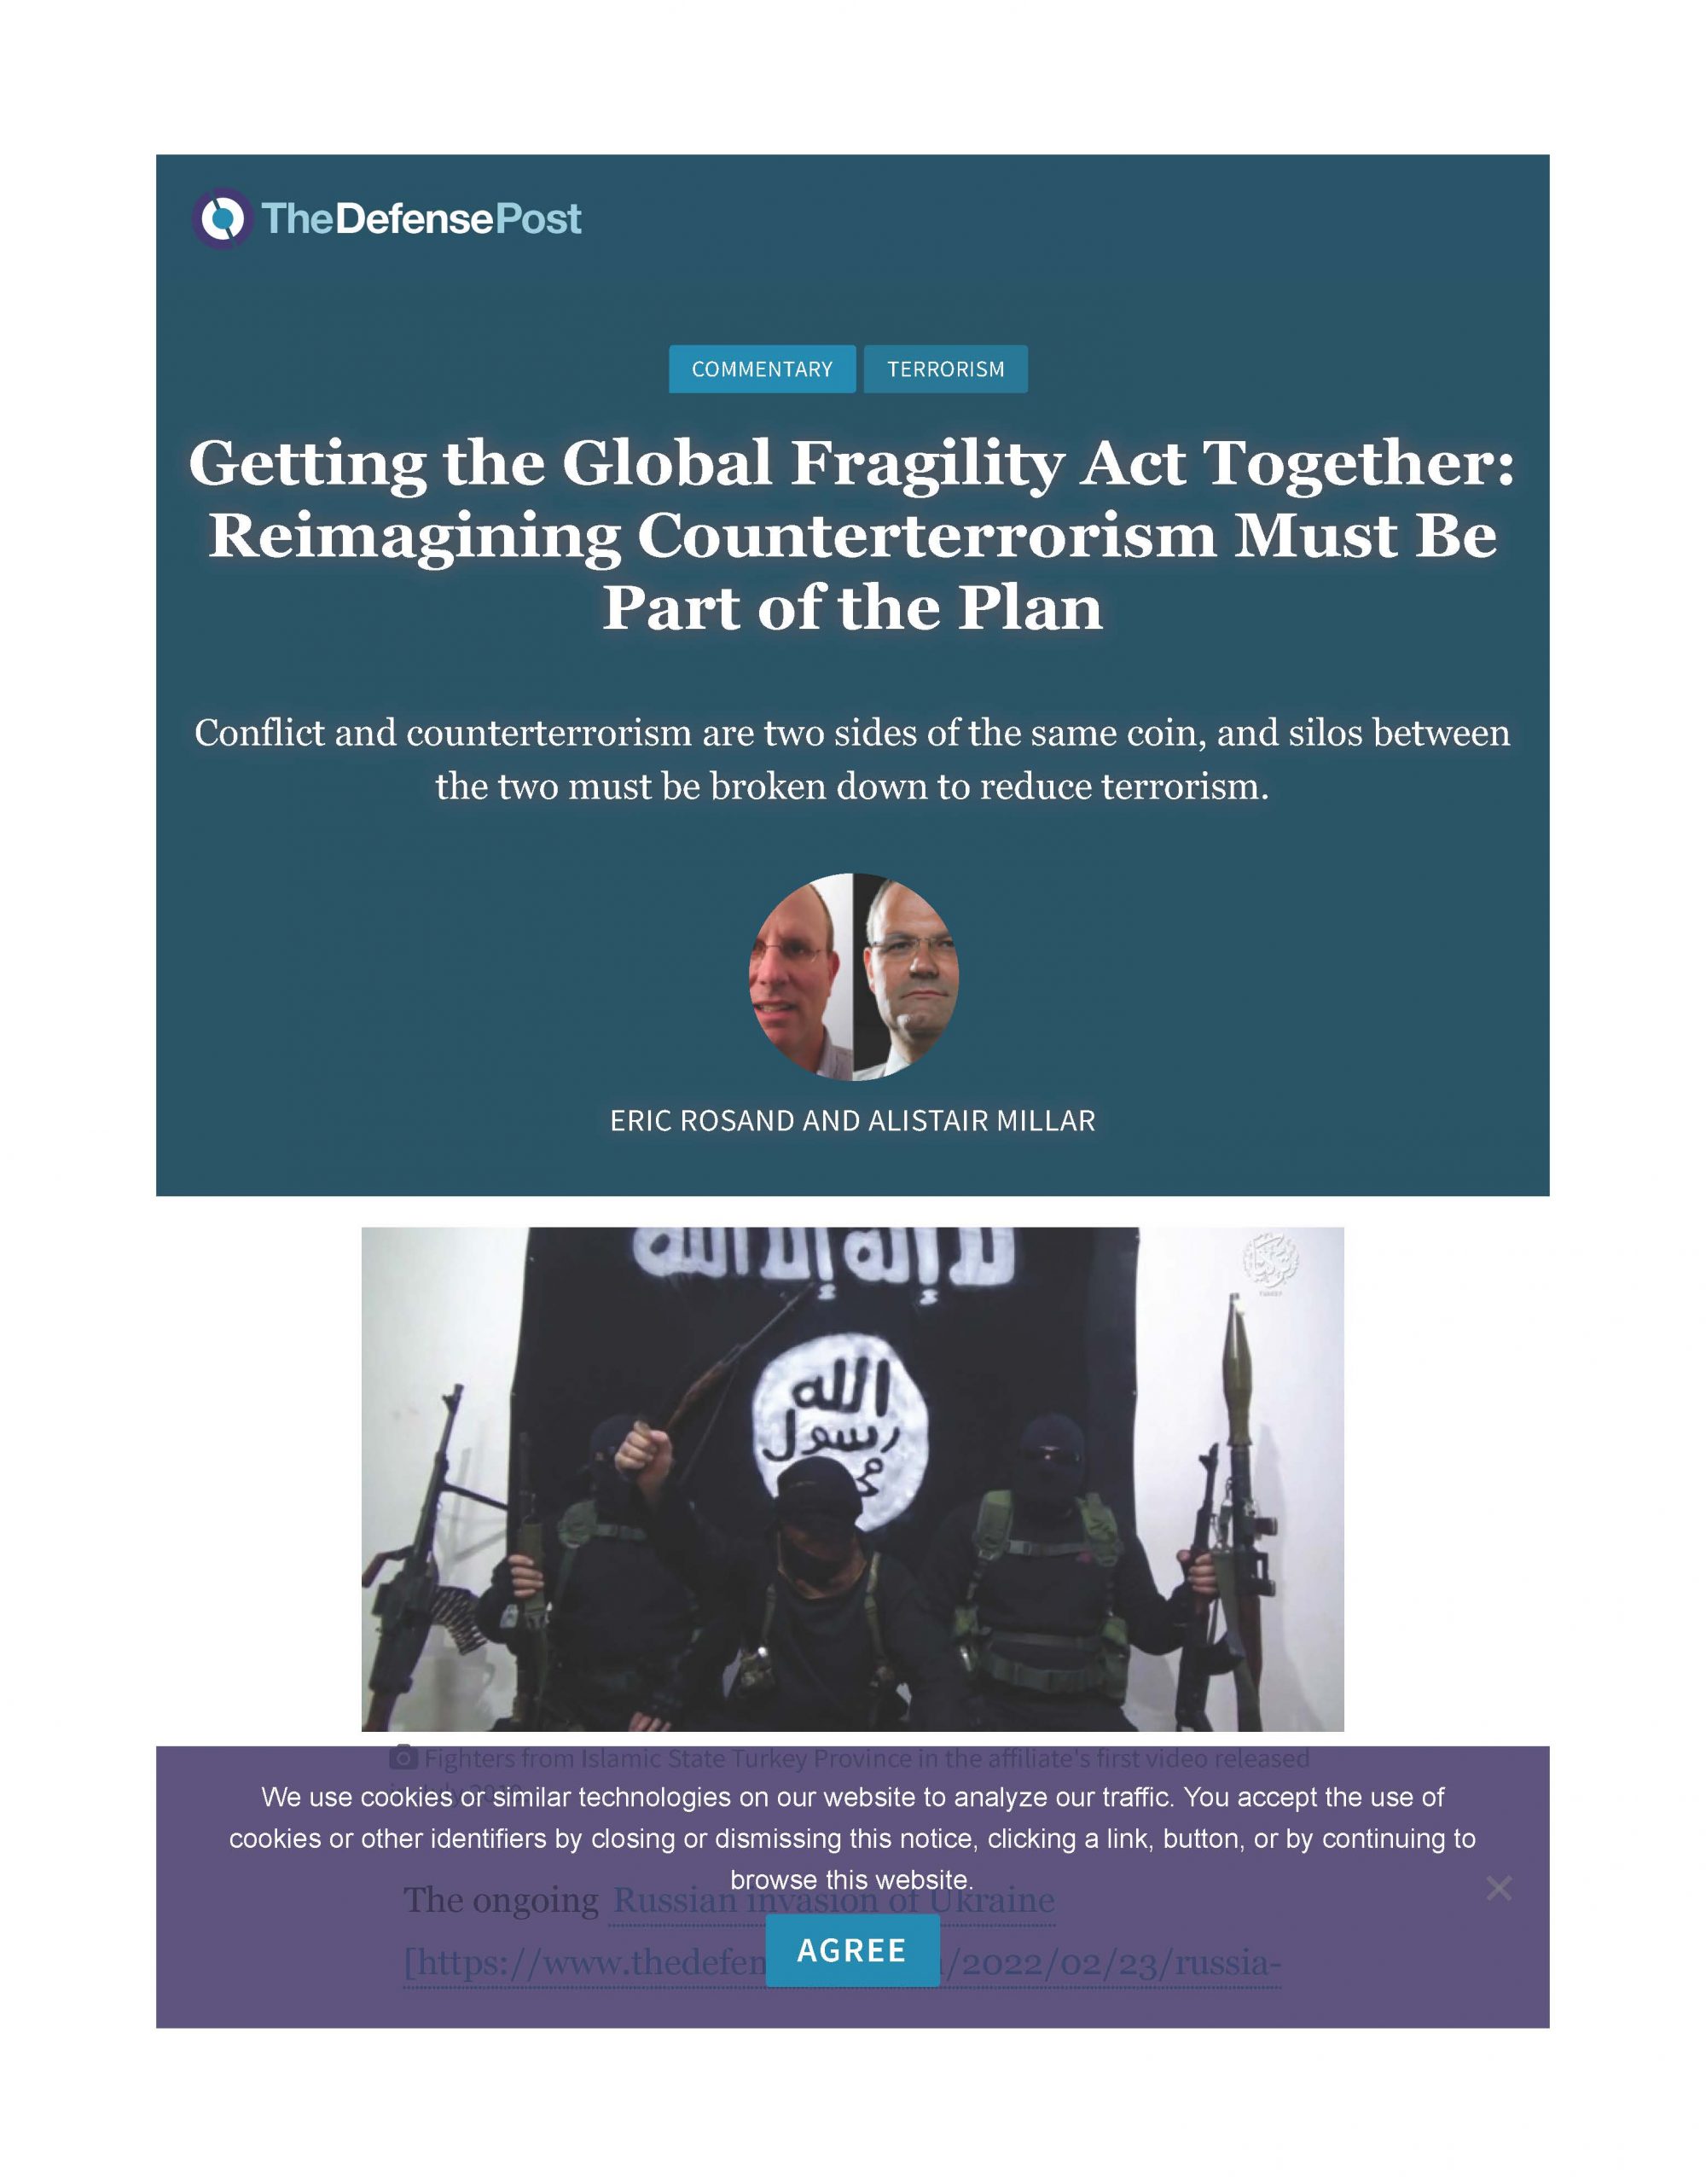 Getting the Global Fragility Act Together: Reimagining Counterterrorism Must Be Part of the Plan